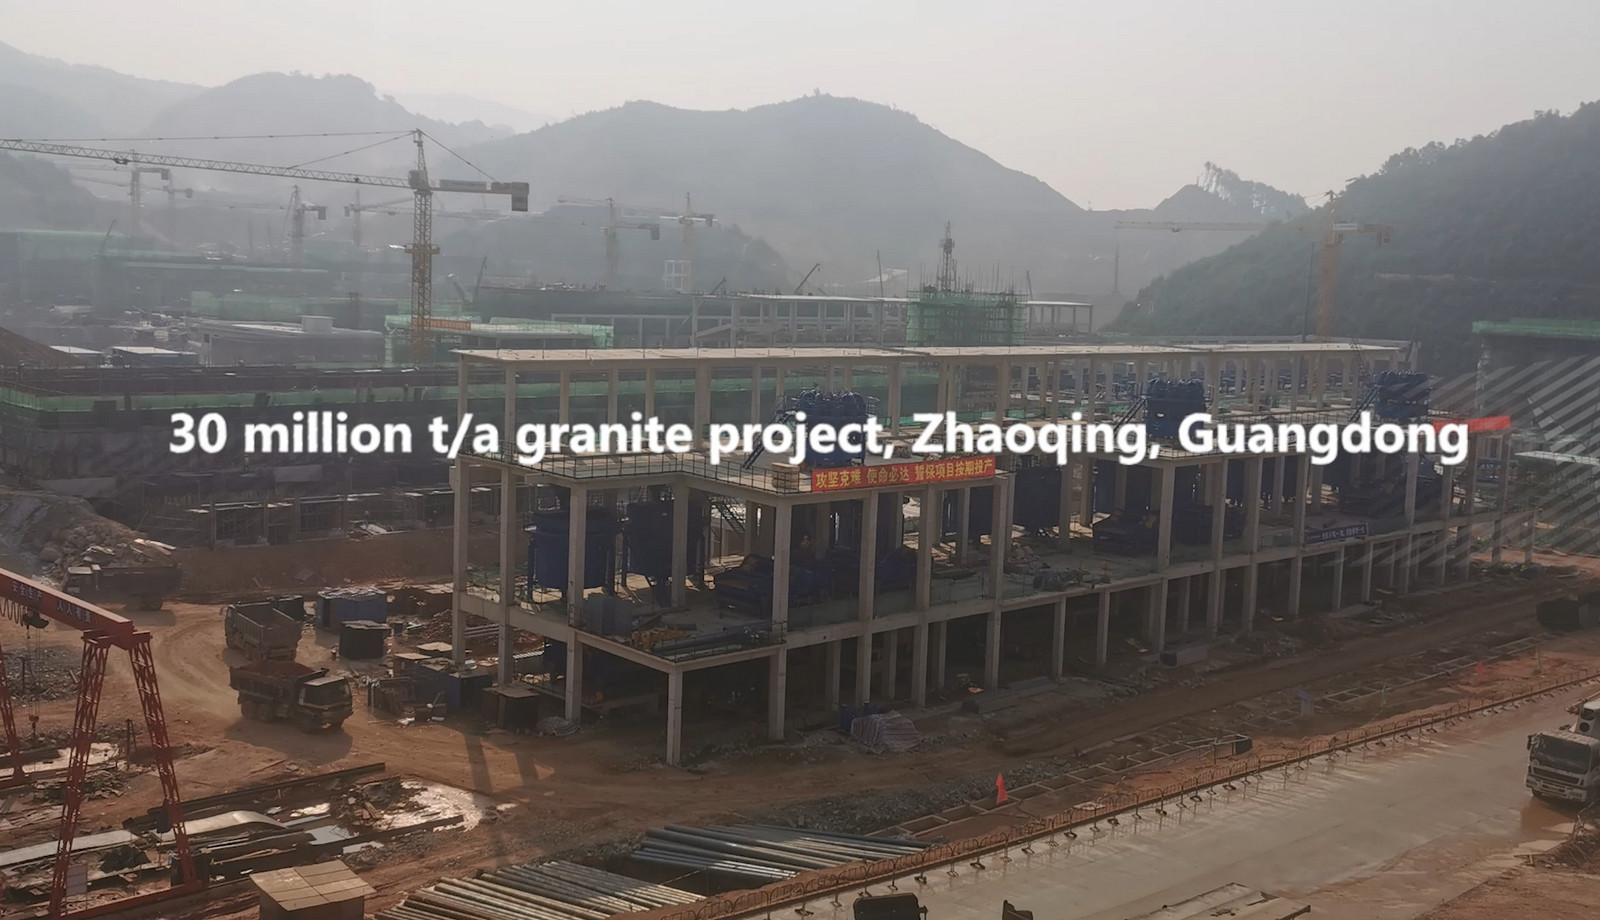 30 million t/a granite project, Zhaoqing, Guangdong